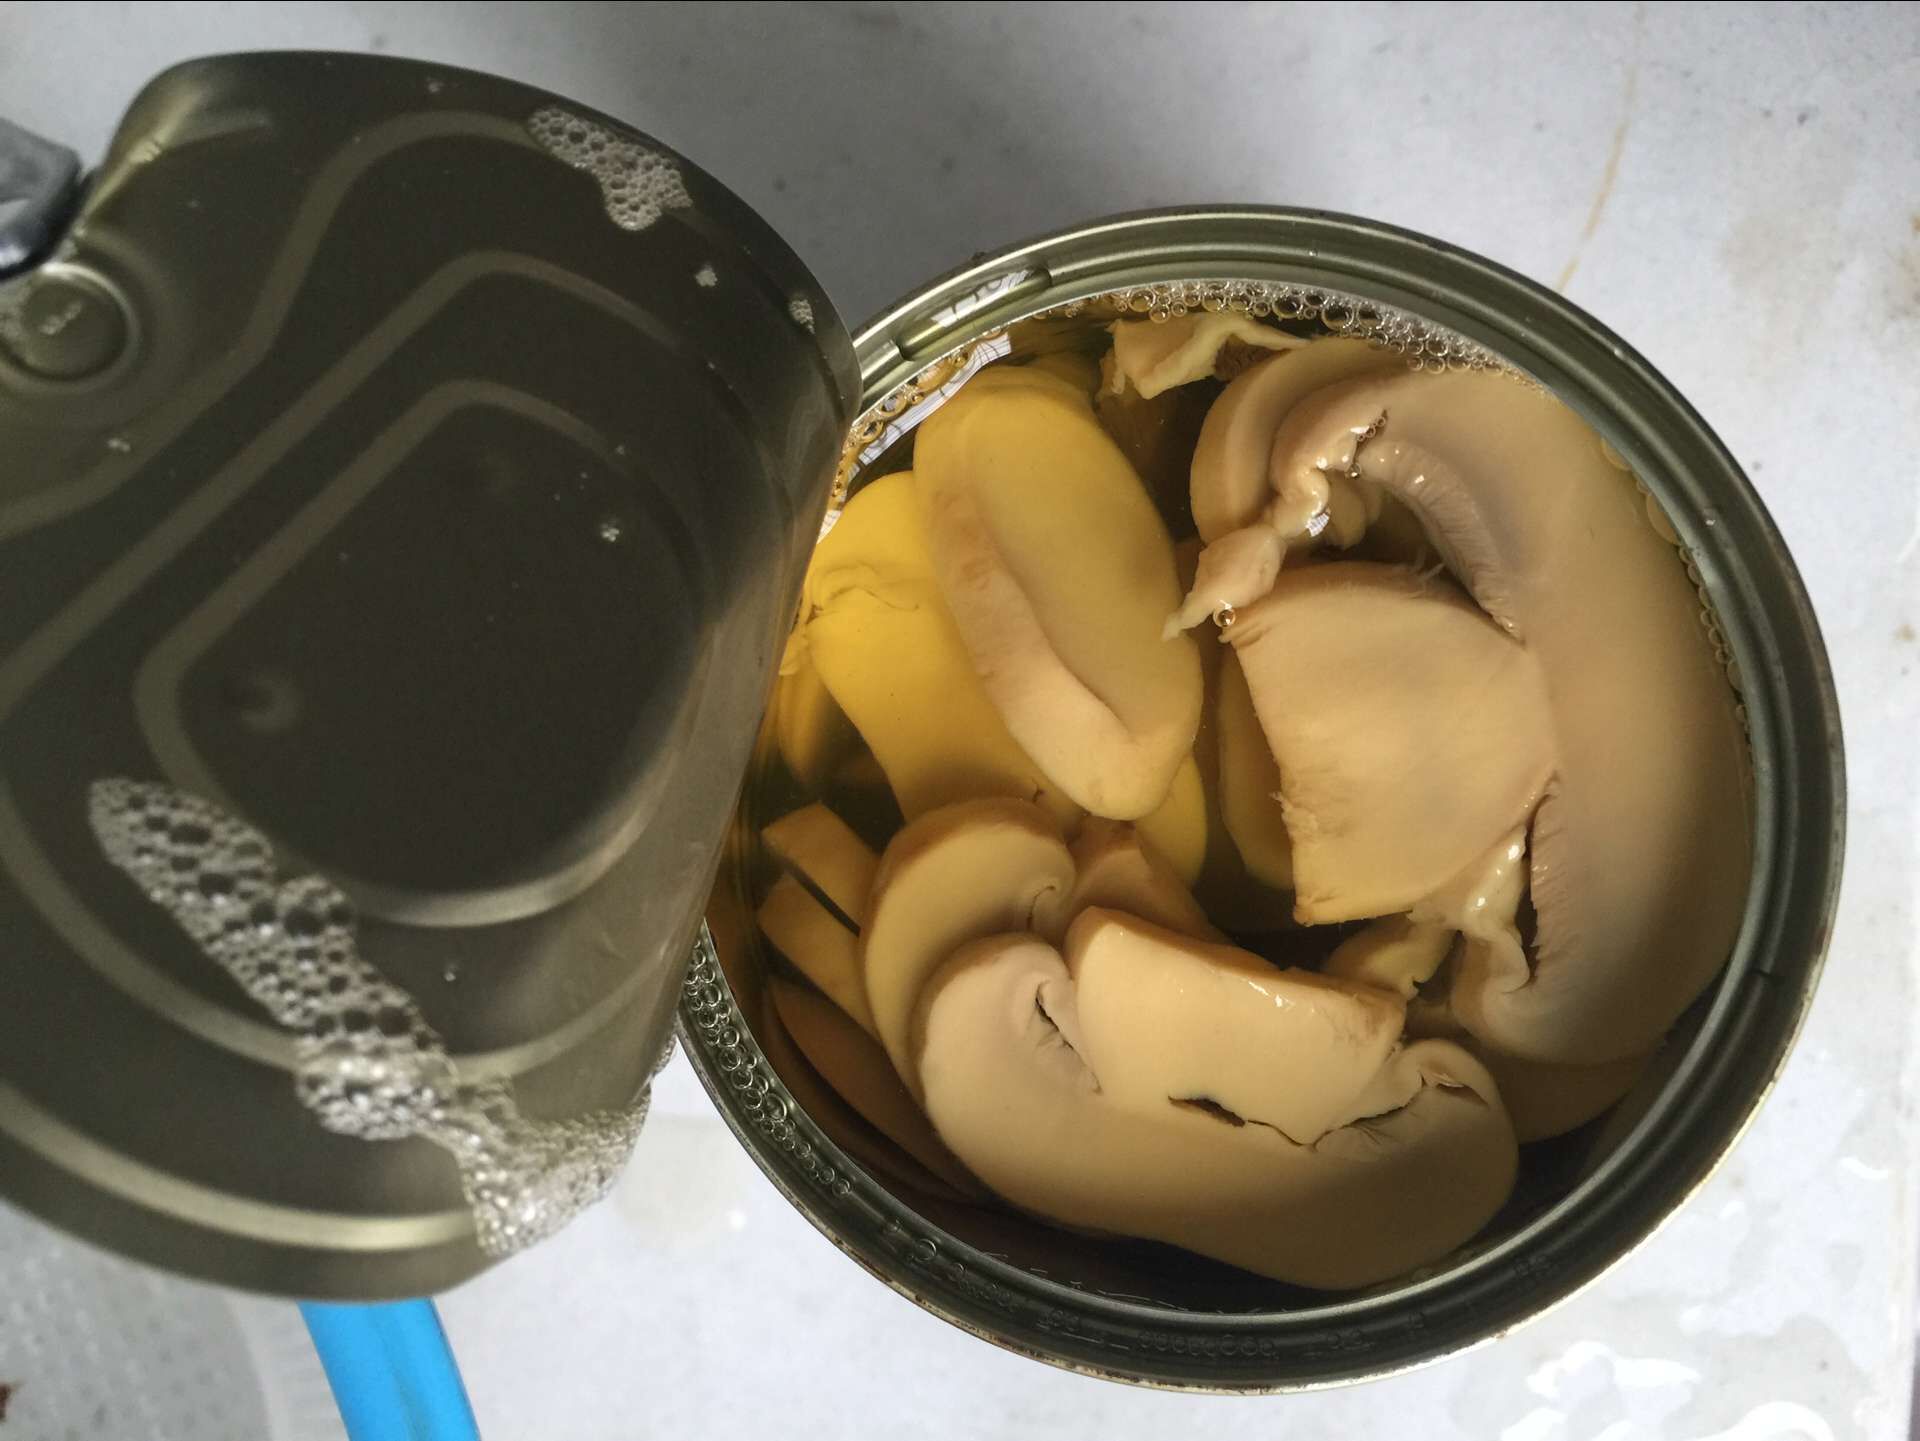 canned mushroom in 425ml, canned champignon pns, canned mushroom pns, canned mushroom sliced